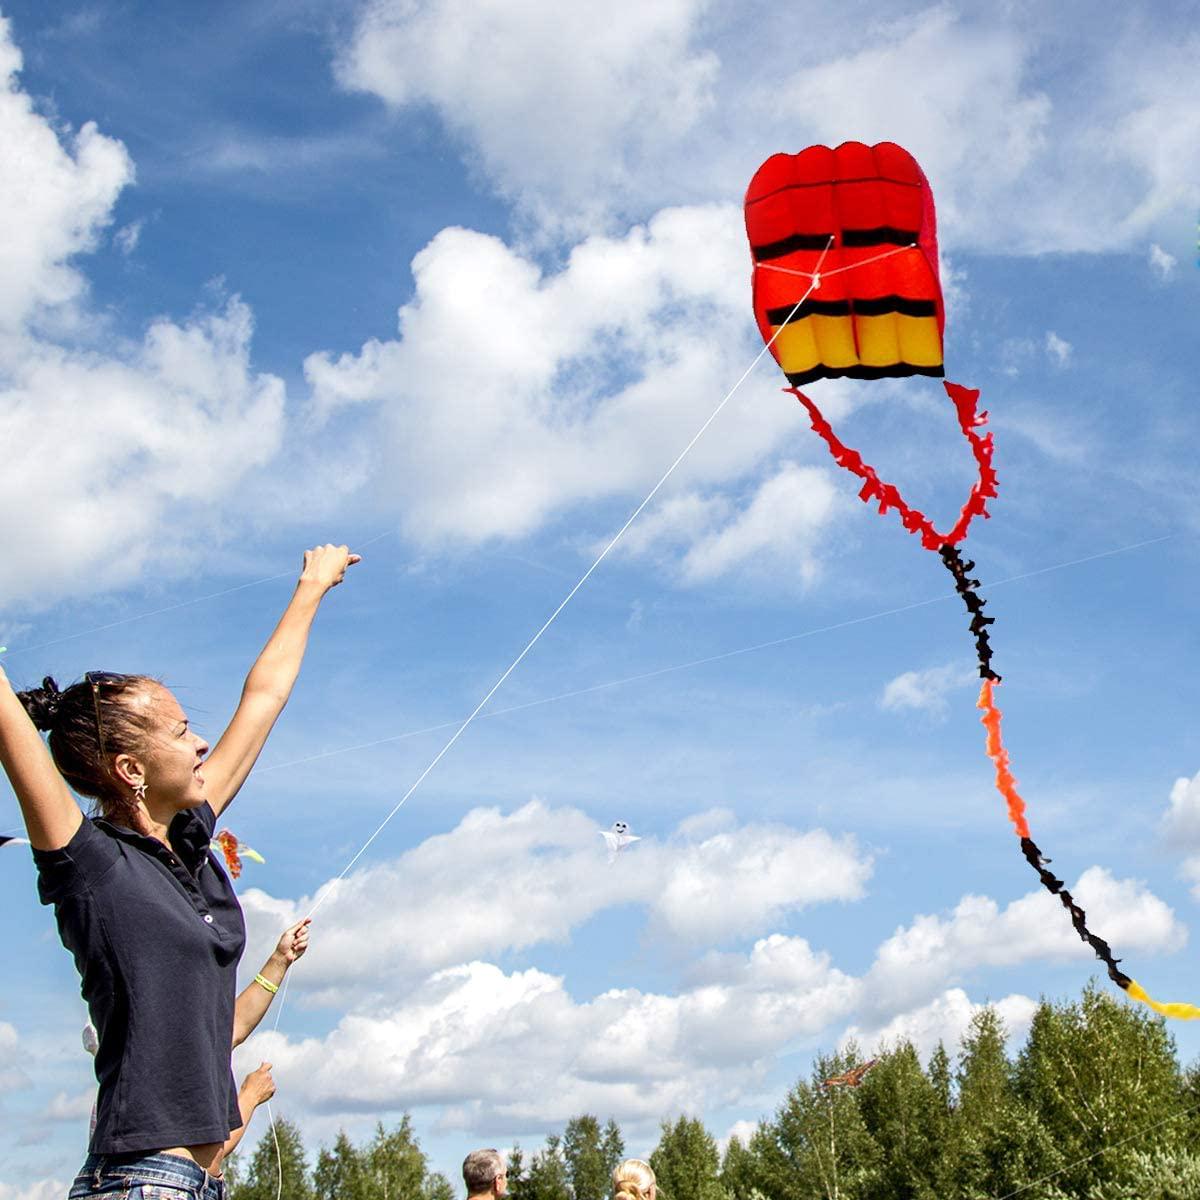 Fullfar, Fullfar Rainbow Parafoil Kite for Kids, Soft Nylon Material Kites with 196 inch/5m Long Y-Shaped Fuzzy/Fringed Tail. Good Pocket Kite for The Brach and Outdoor Activities. (red